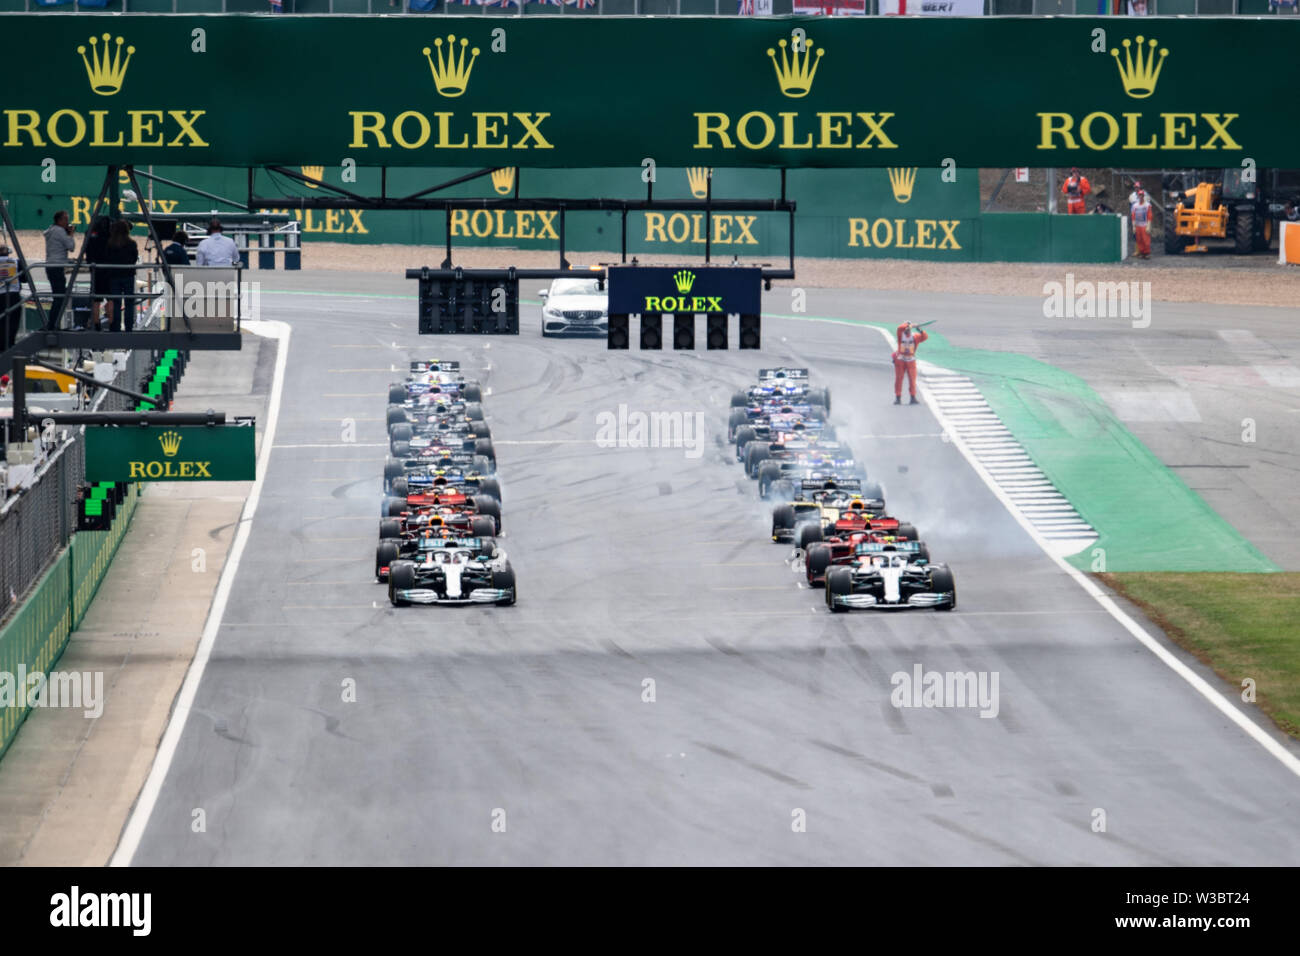 Silverstone, UK.  14th July, 2019. A general view of the race during Formula 1 Rolex British Grand Prix 2019 at Silverstone Circuit on Sunday, July 14, 2019 in TOWCESTER, ENGLAND. Credit: Taka G Wu/Alamy Live News Stock Photo